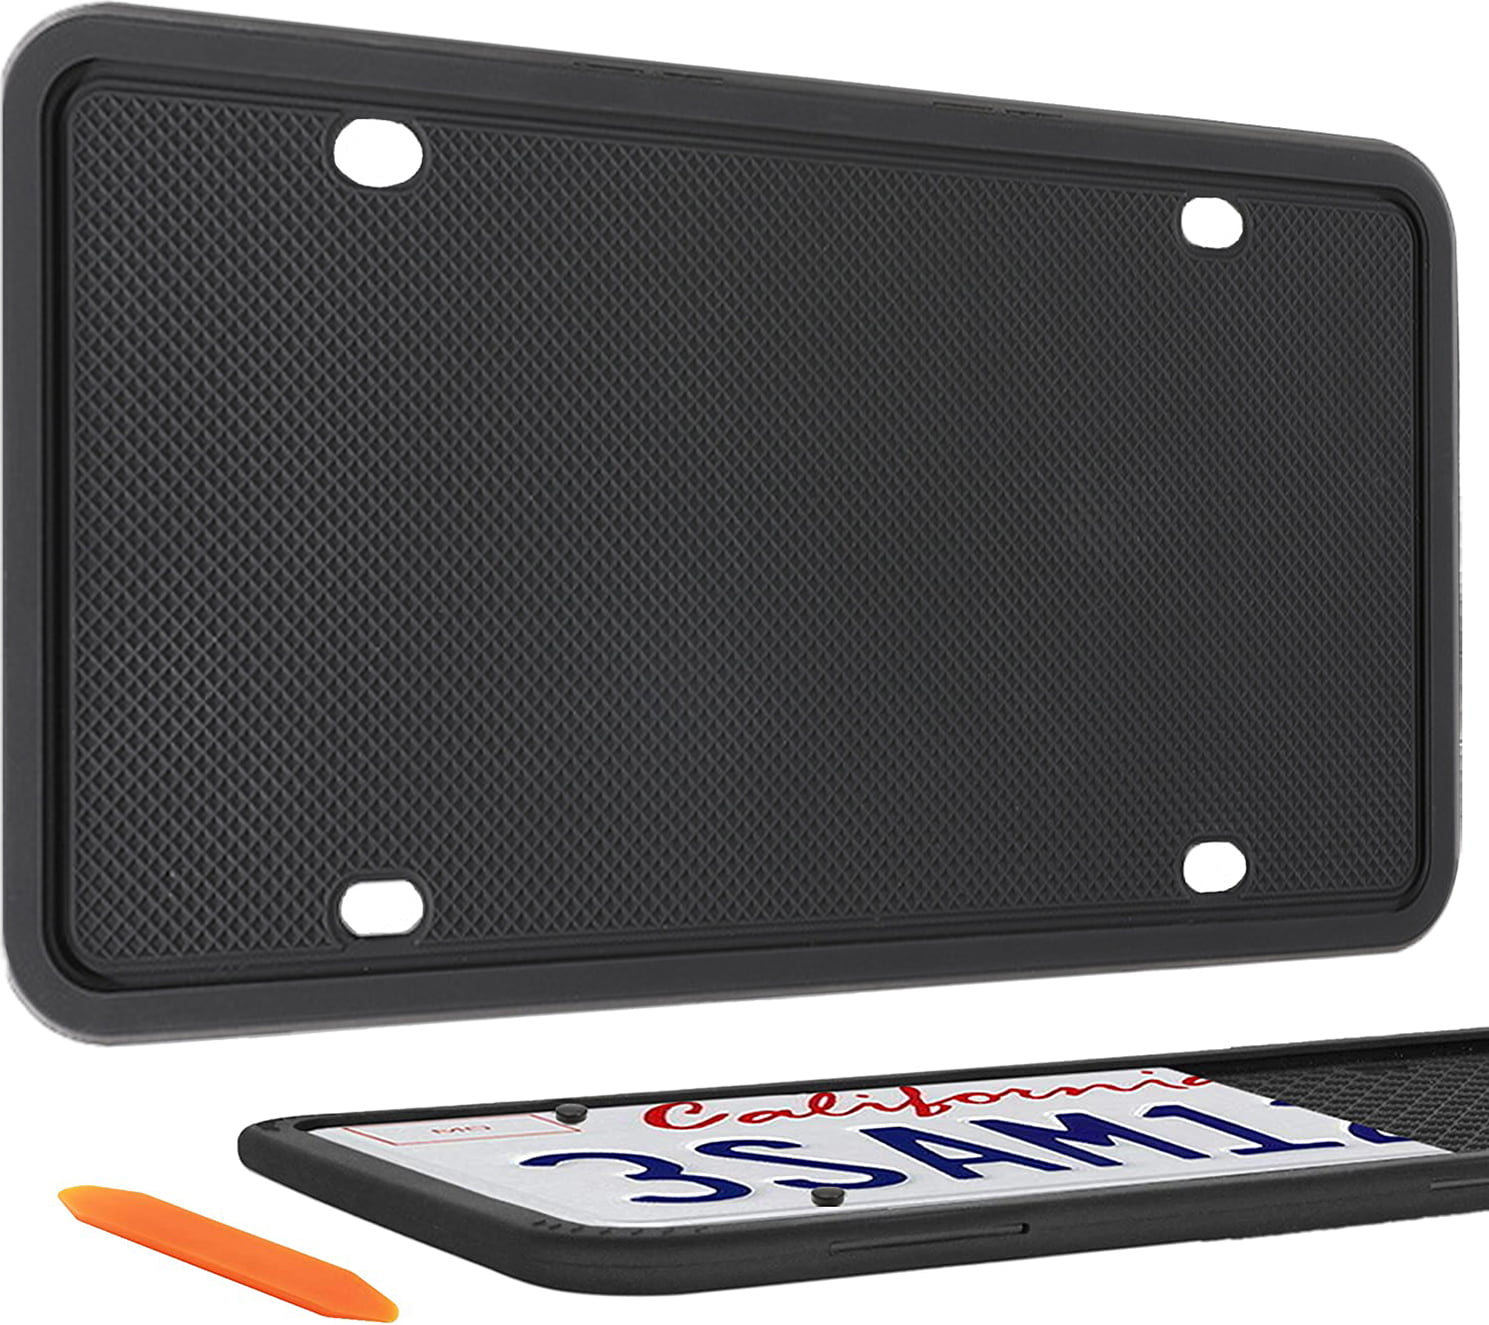 Guard-Tekk Silicone License Plate Frame Weather Proof Rust Proof Rattle Proof